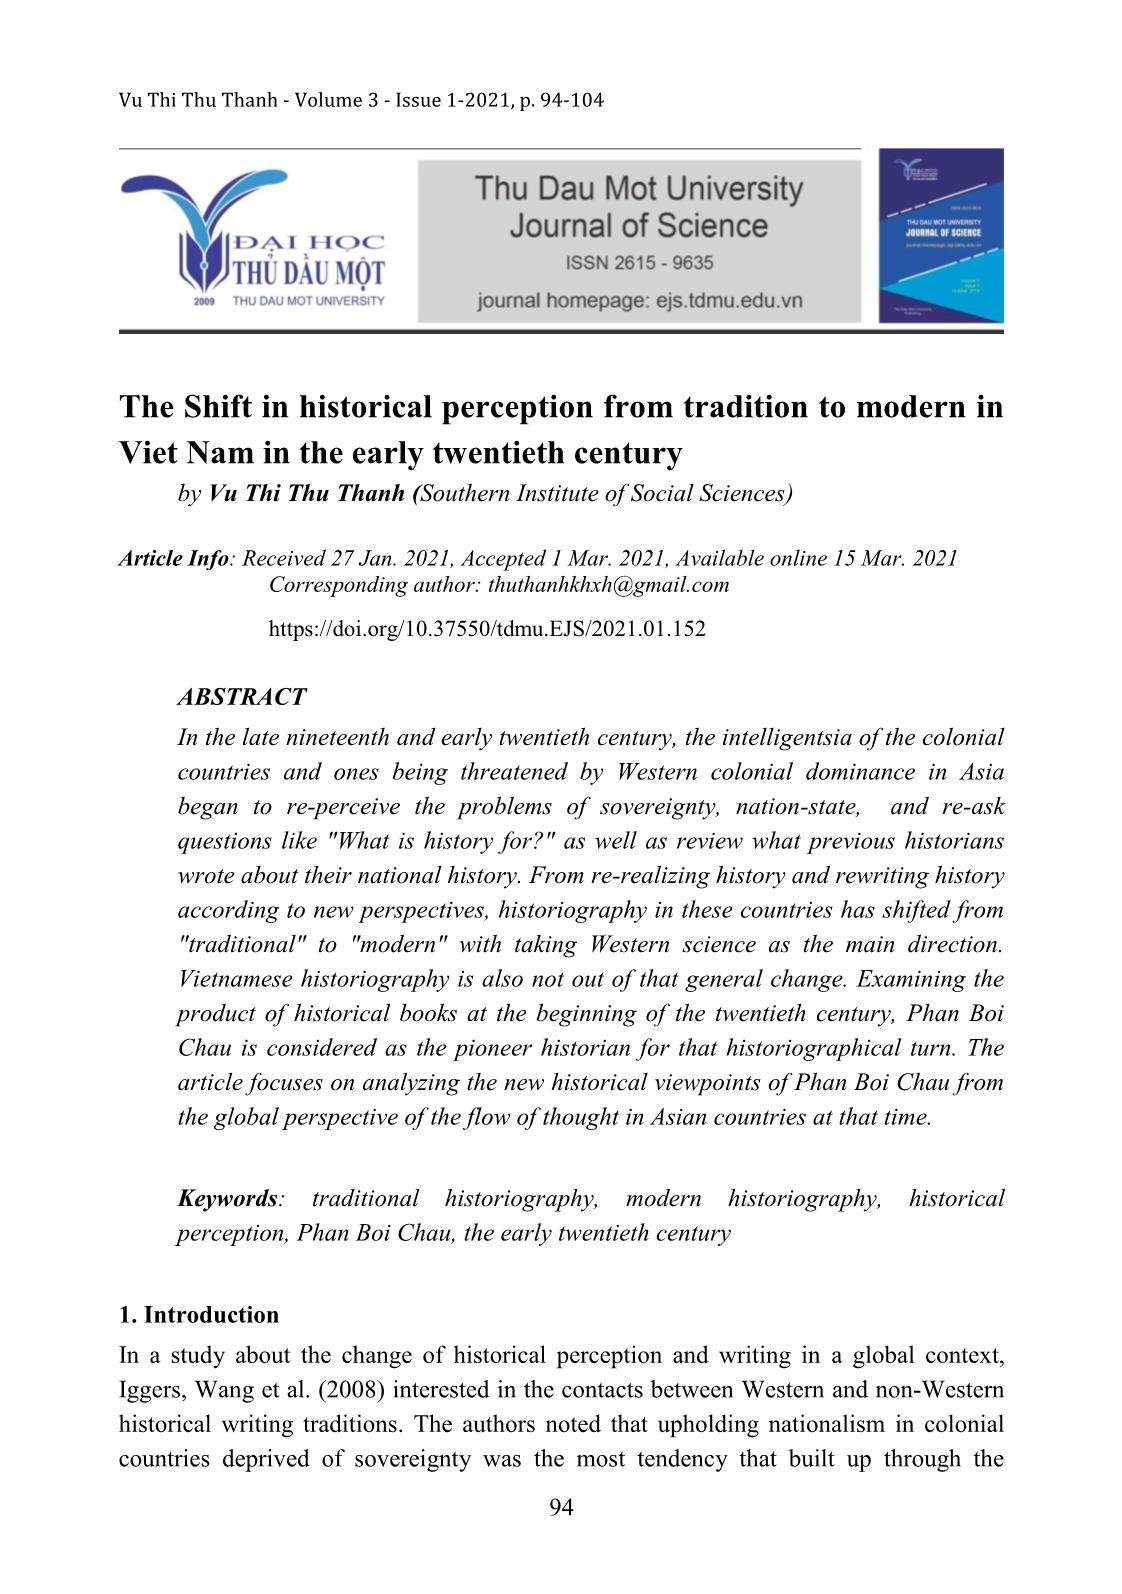 The Shift in historical perception from tradition to modern in Viet Nam in the early twentieth century trang 1